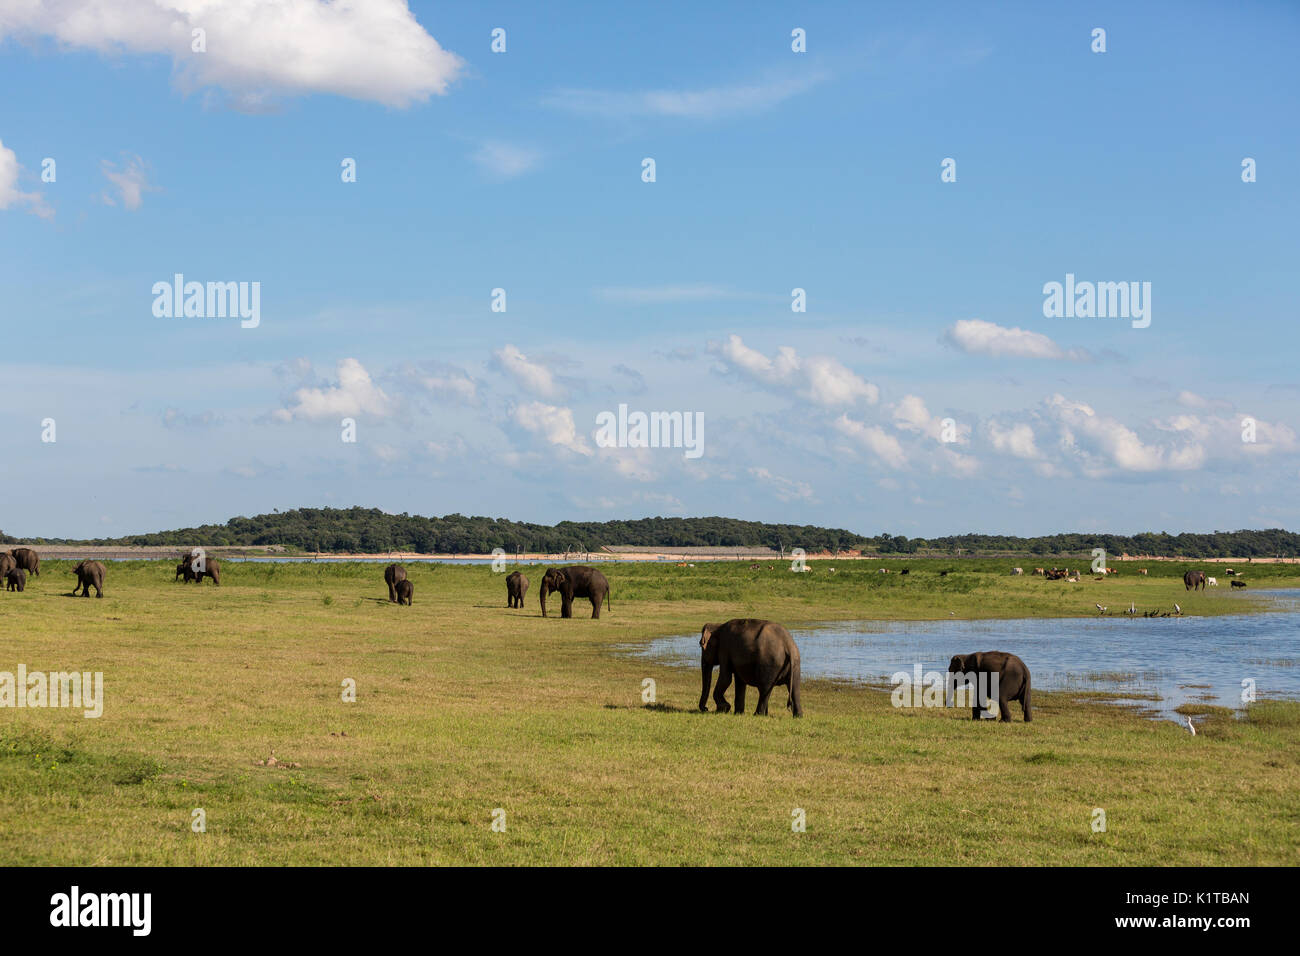 Asian elephants enjoy the open spaces of the Kaudulla National Park in the late afternoon light. Stock Photo